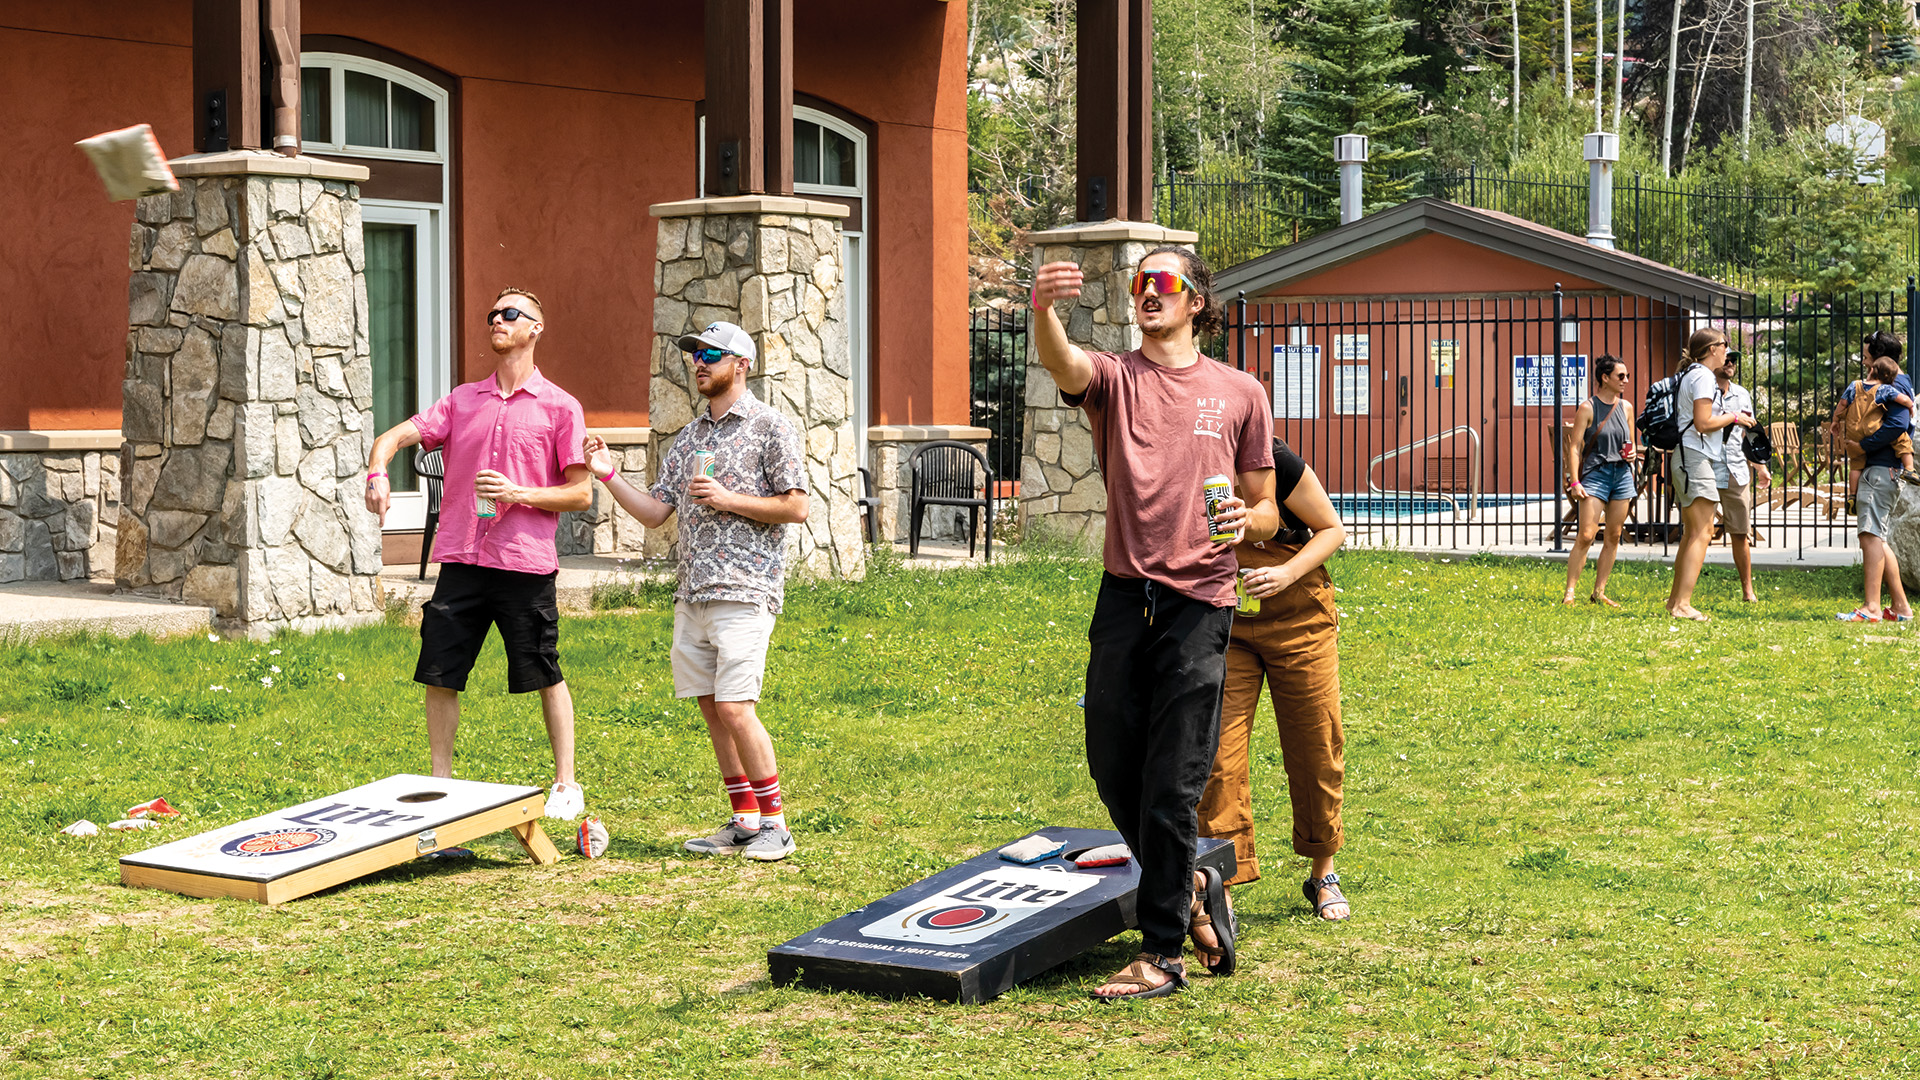 Friends playing Cornhole at Solitude.